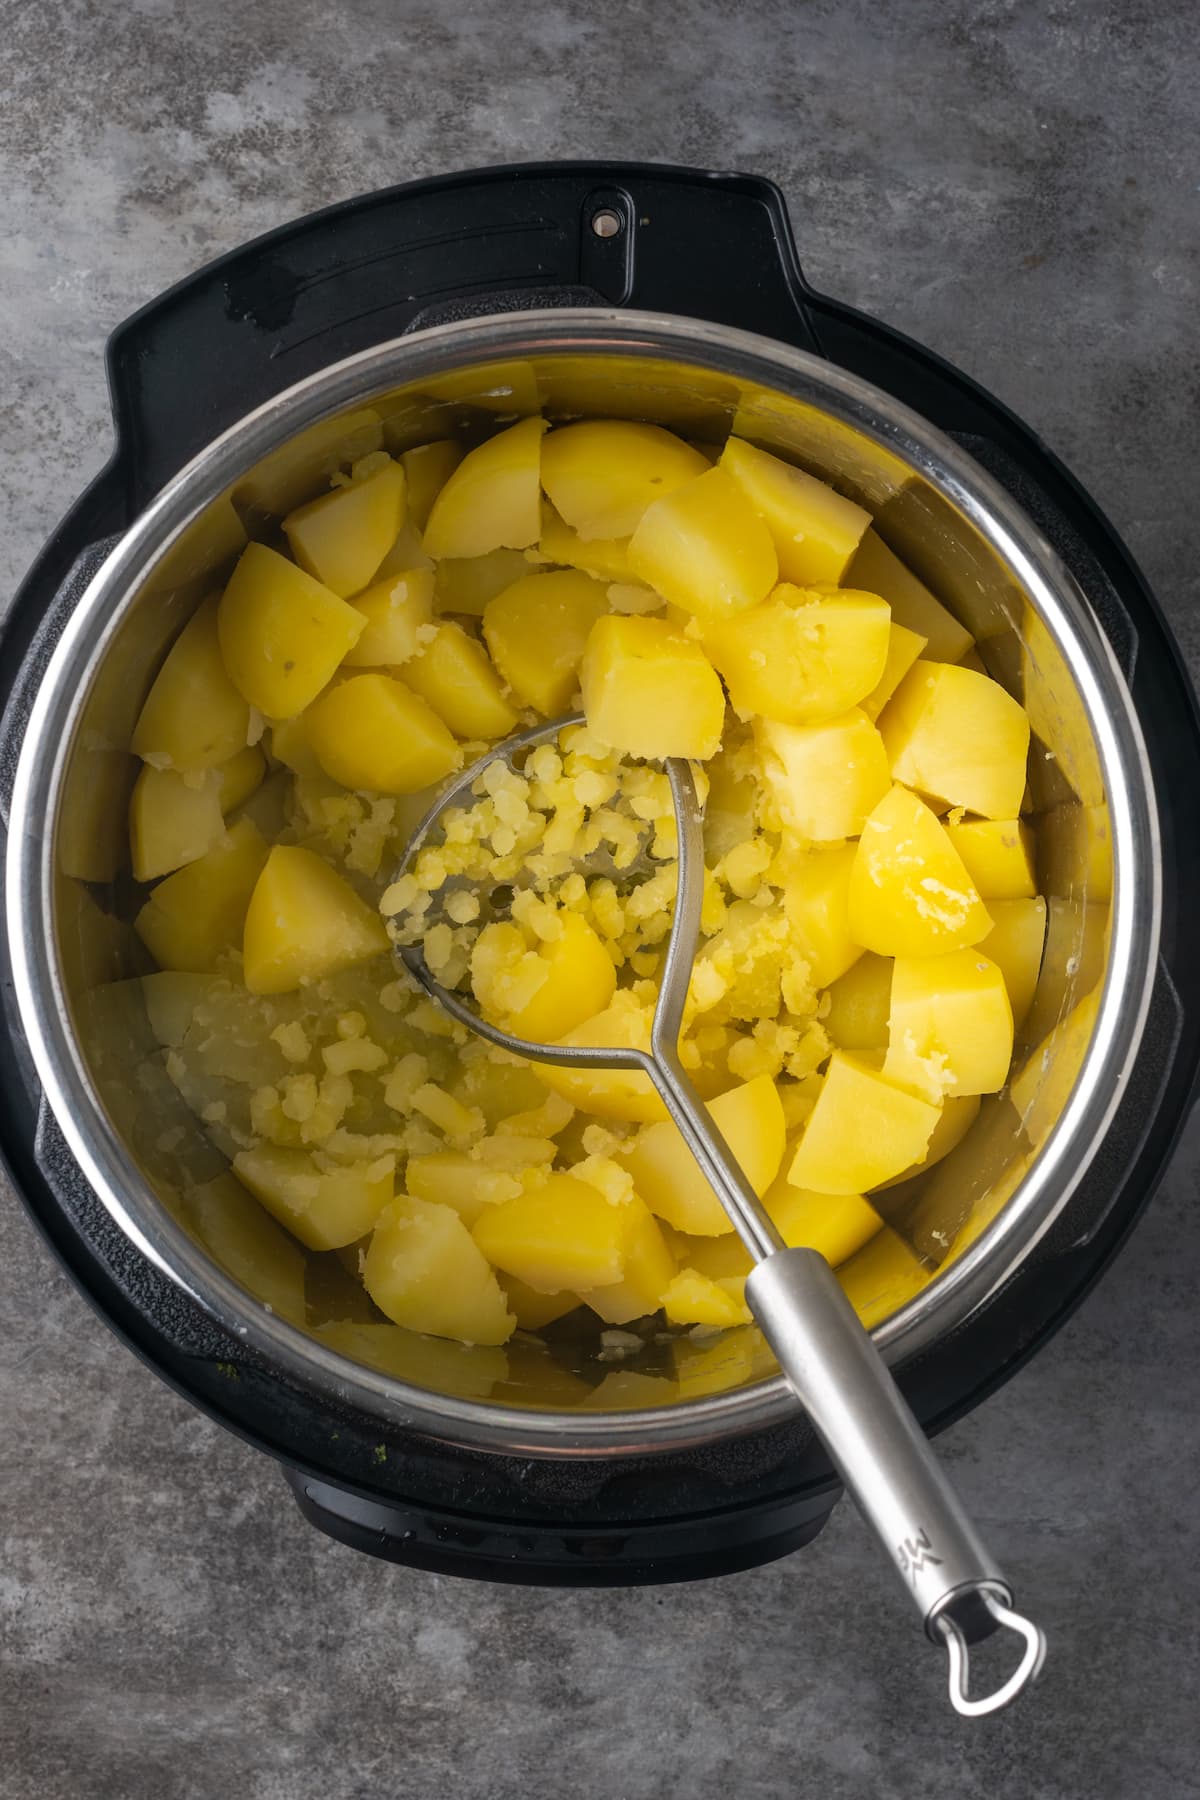 A potato masher is used to mash cooked chopped potatoes inside an Instant Pot.